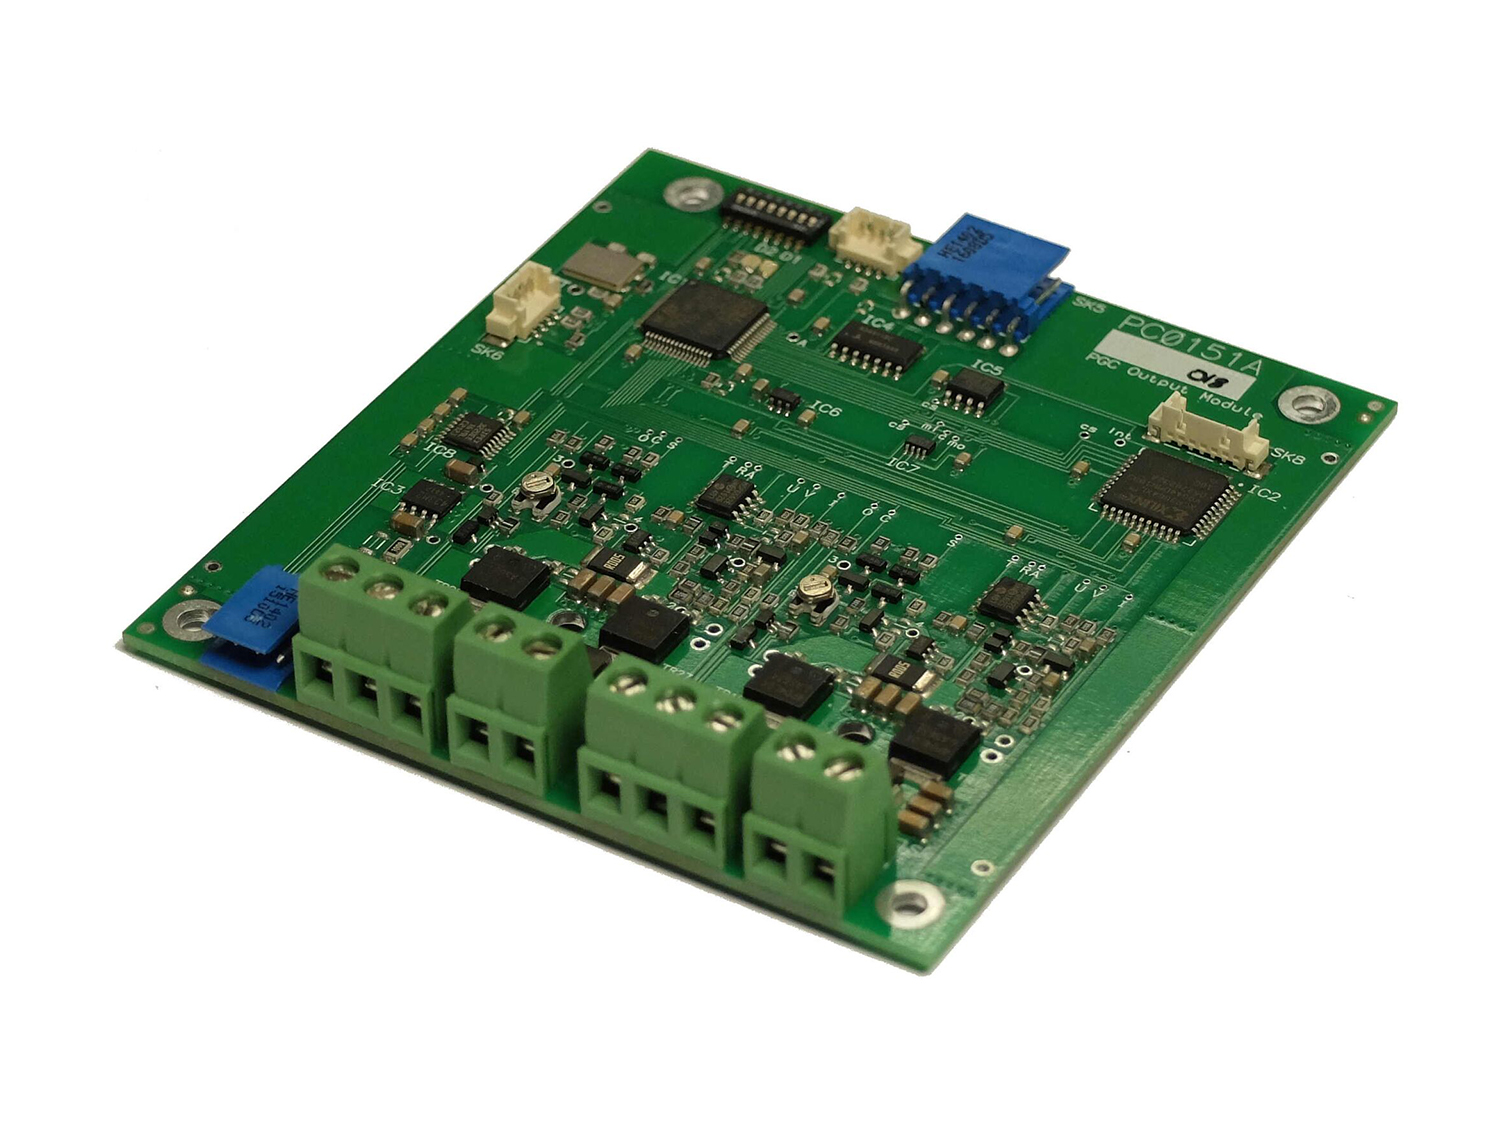 Power Generation Control Output (PGCO) module